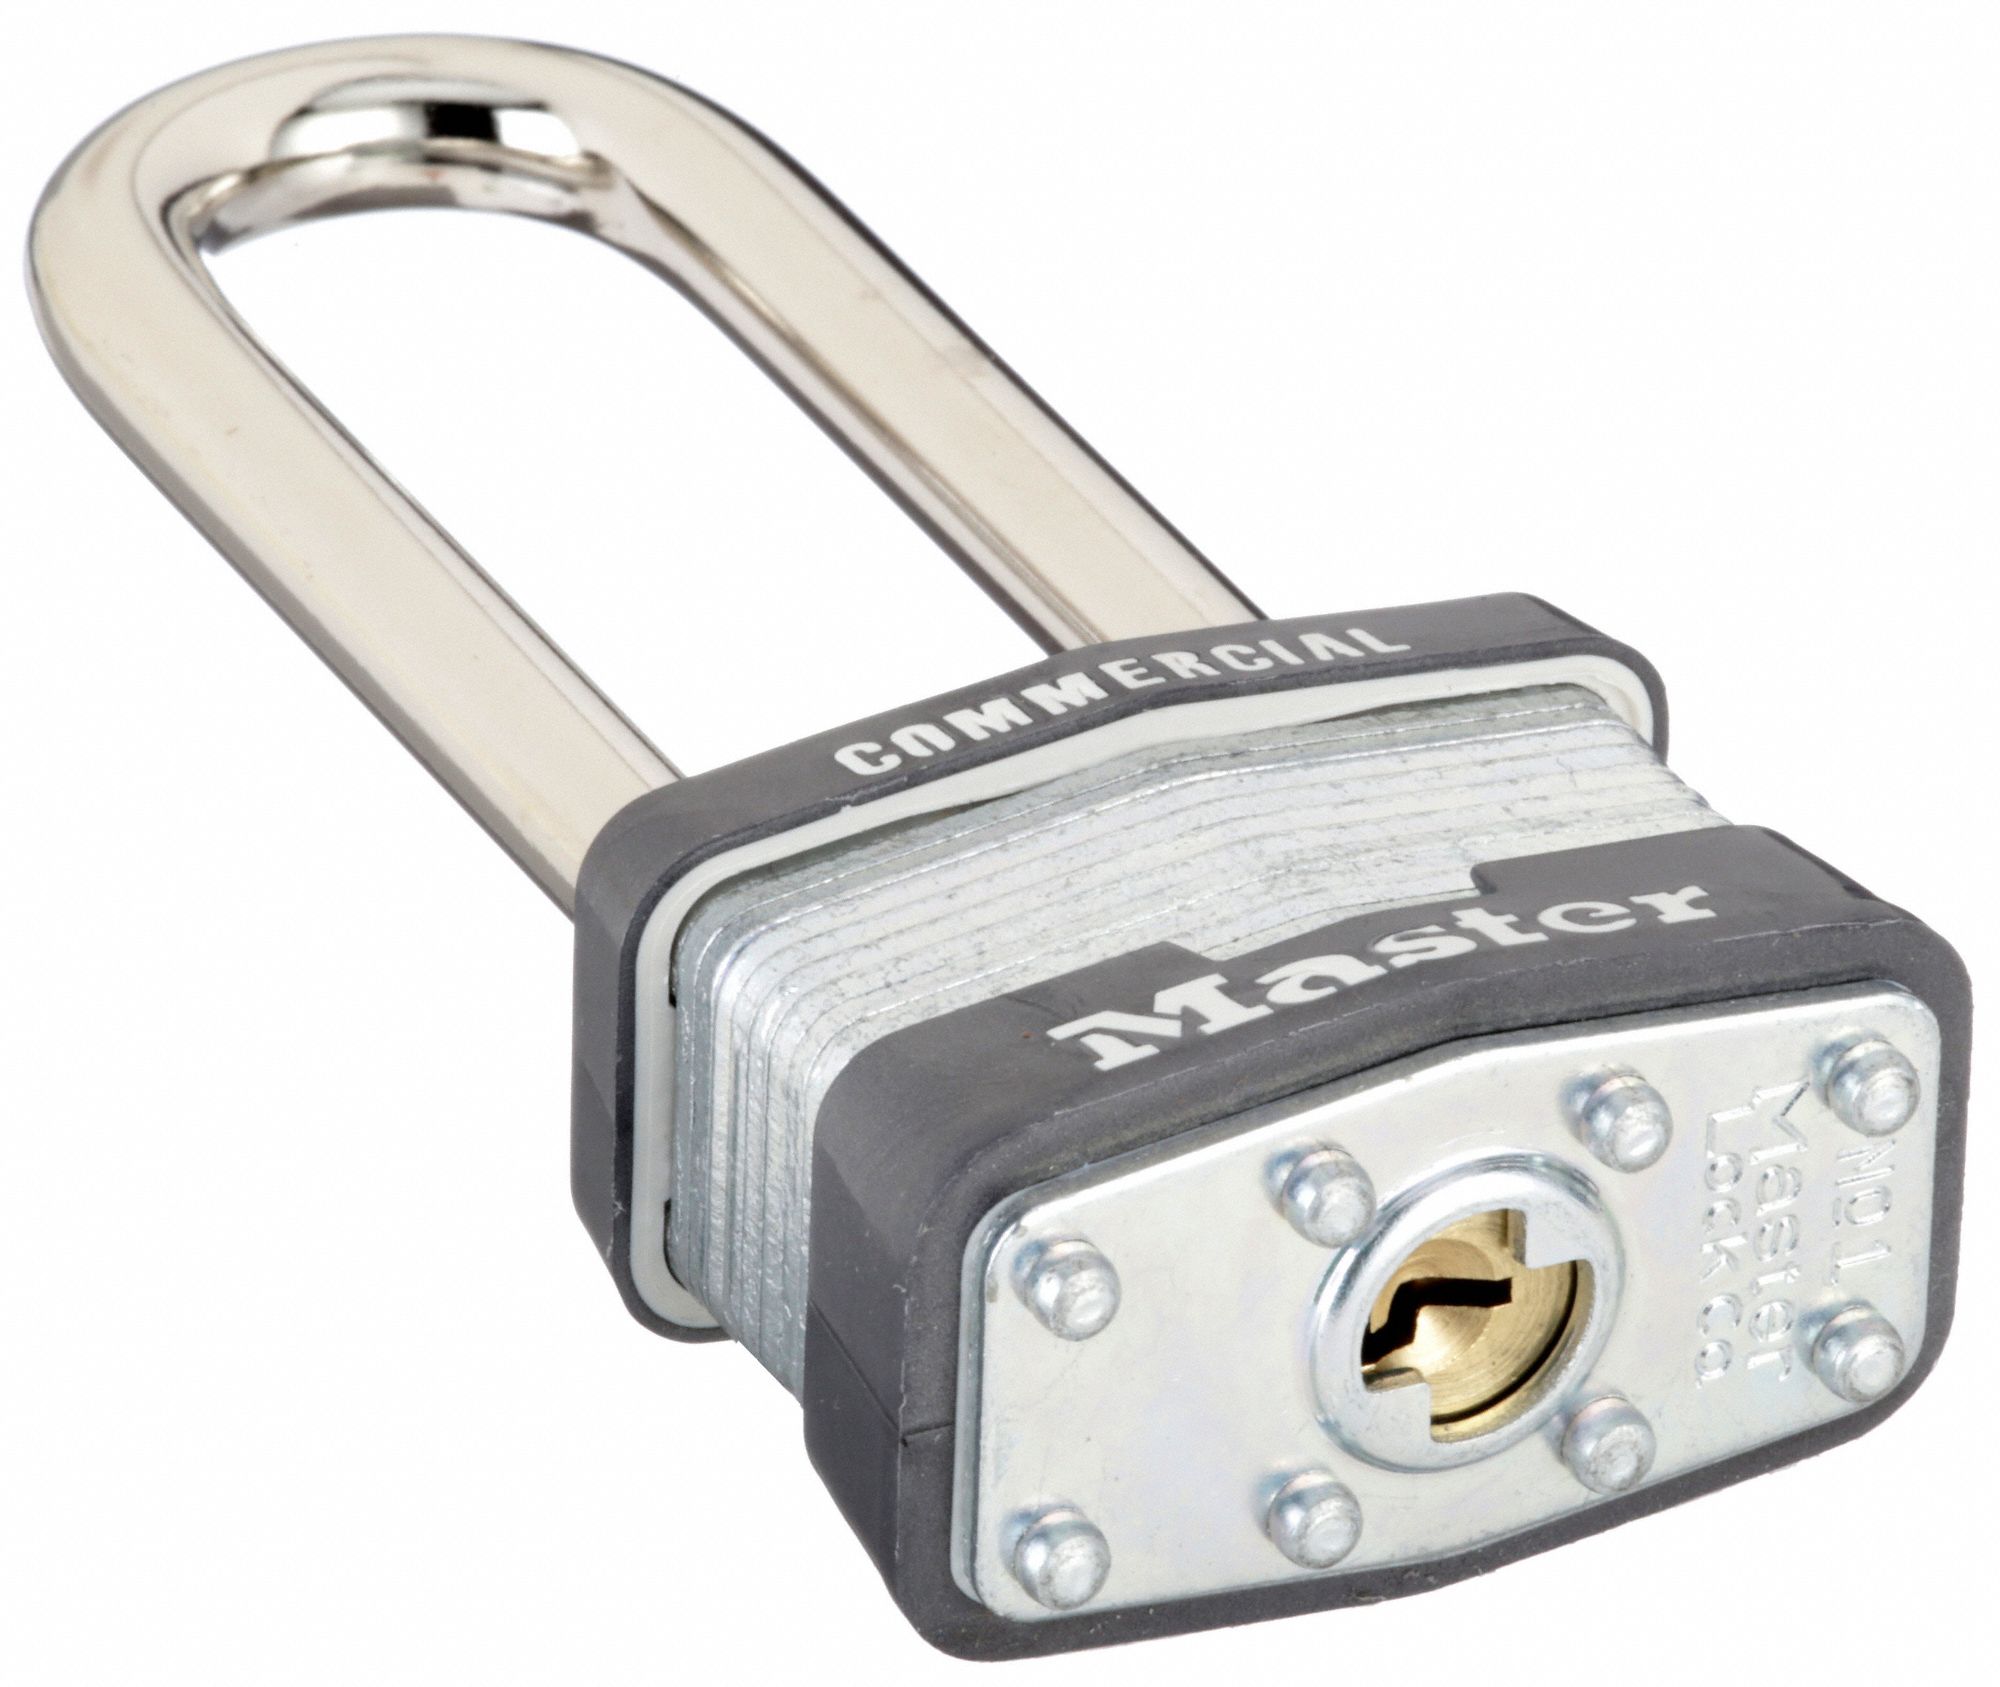 Padlock model 321, in gold-plated metal with key. Decora…